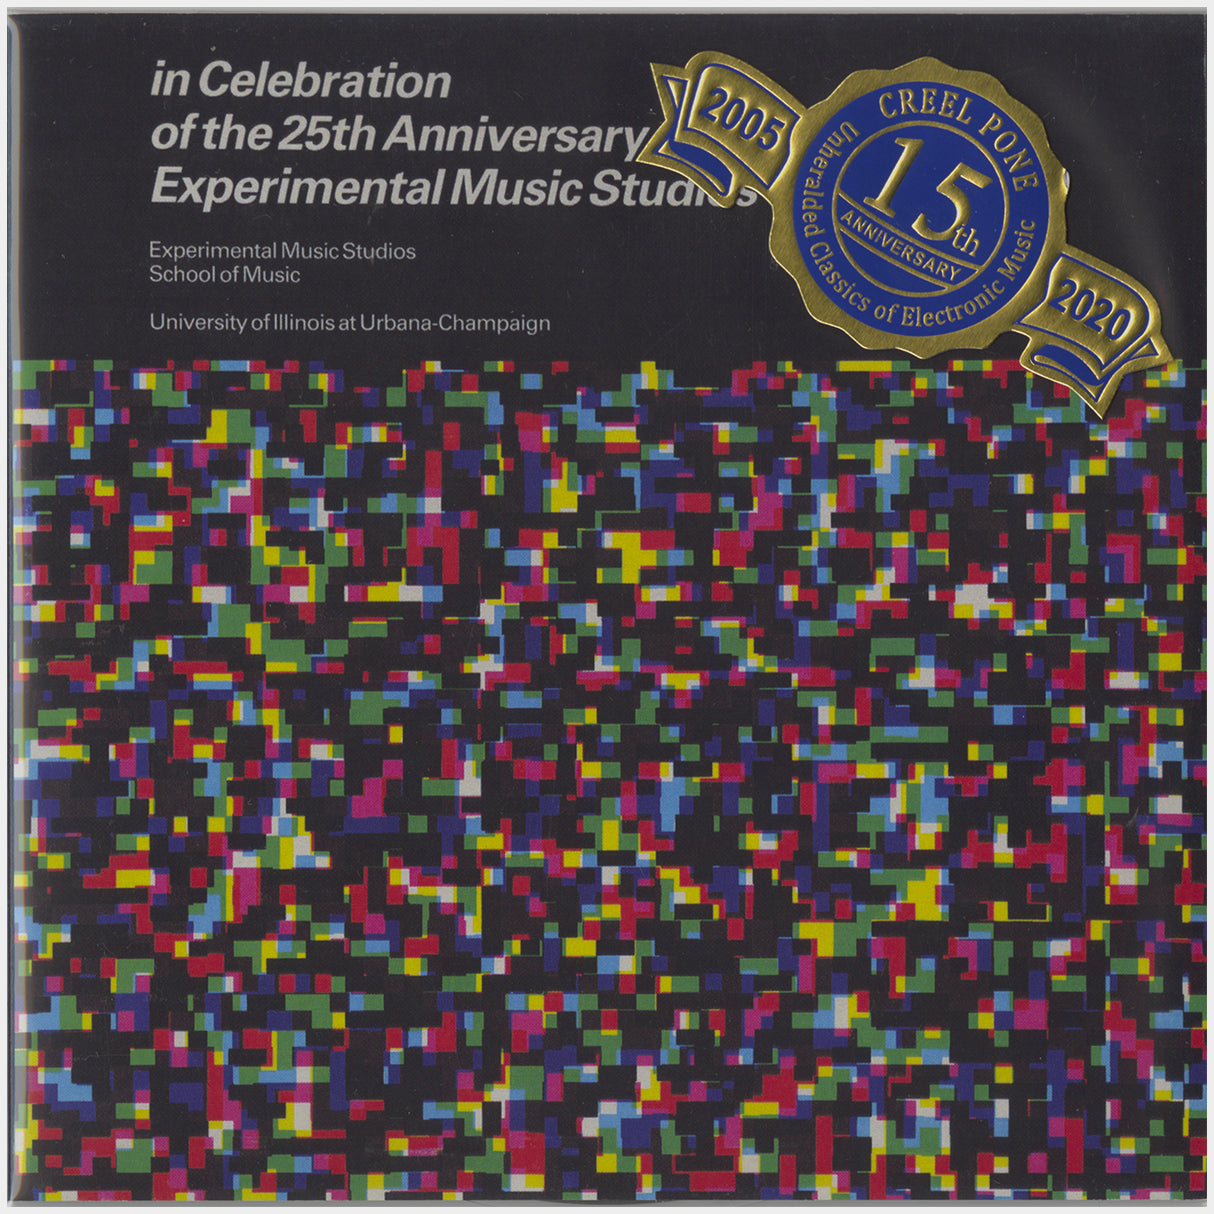 [CP 205 CD] in Celebration of the 25th Anniversary of the Experimental Music Studios